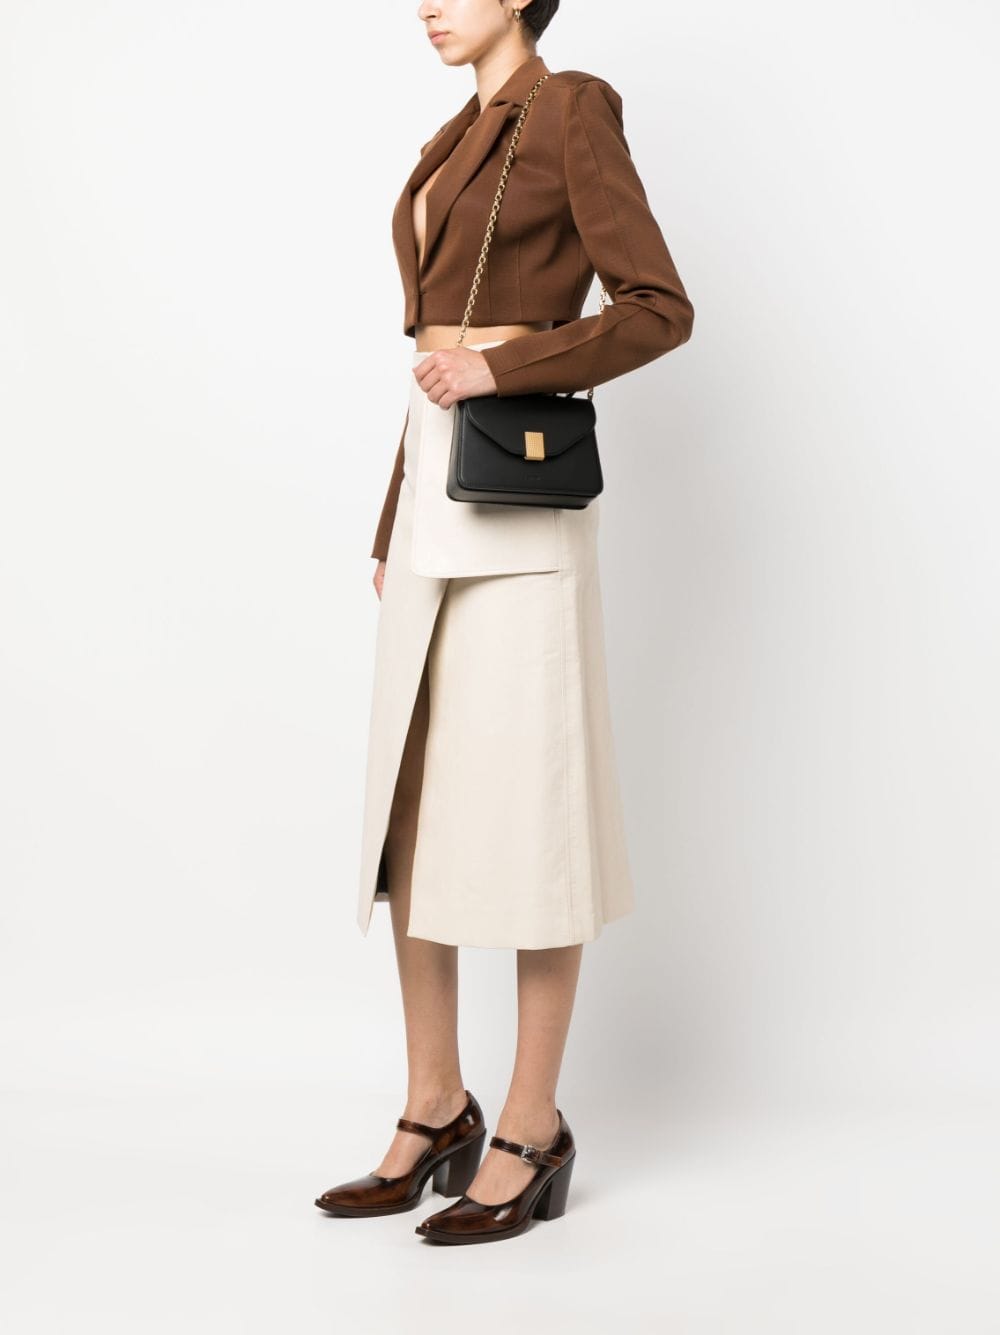 Concerto Leather Clutch for Female - Tan - One Size - Lanvin